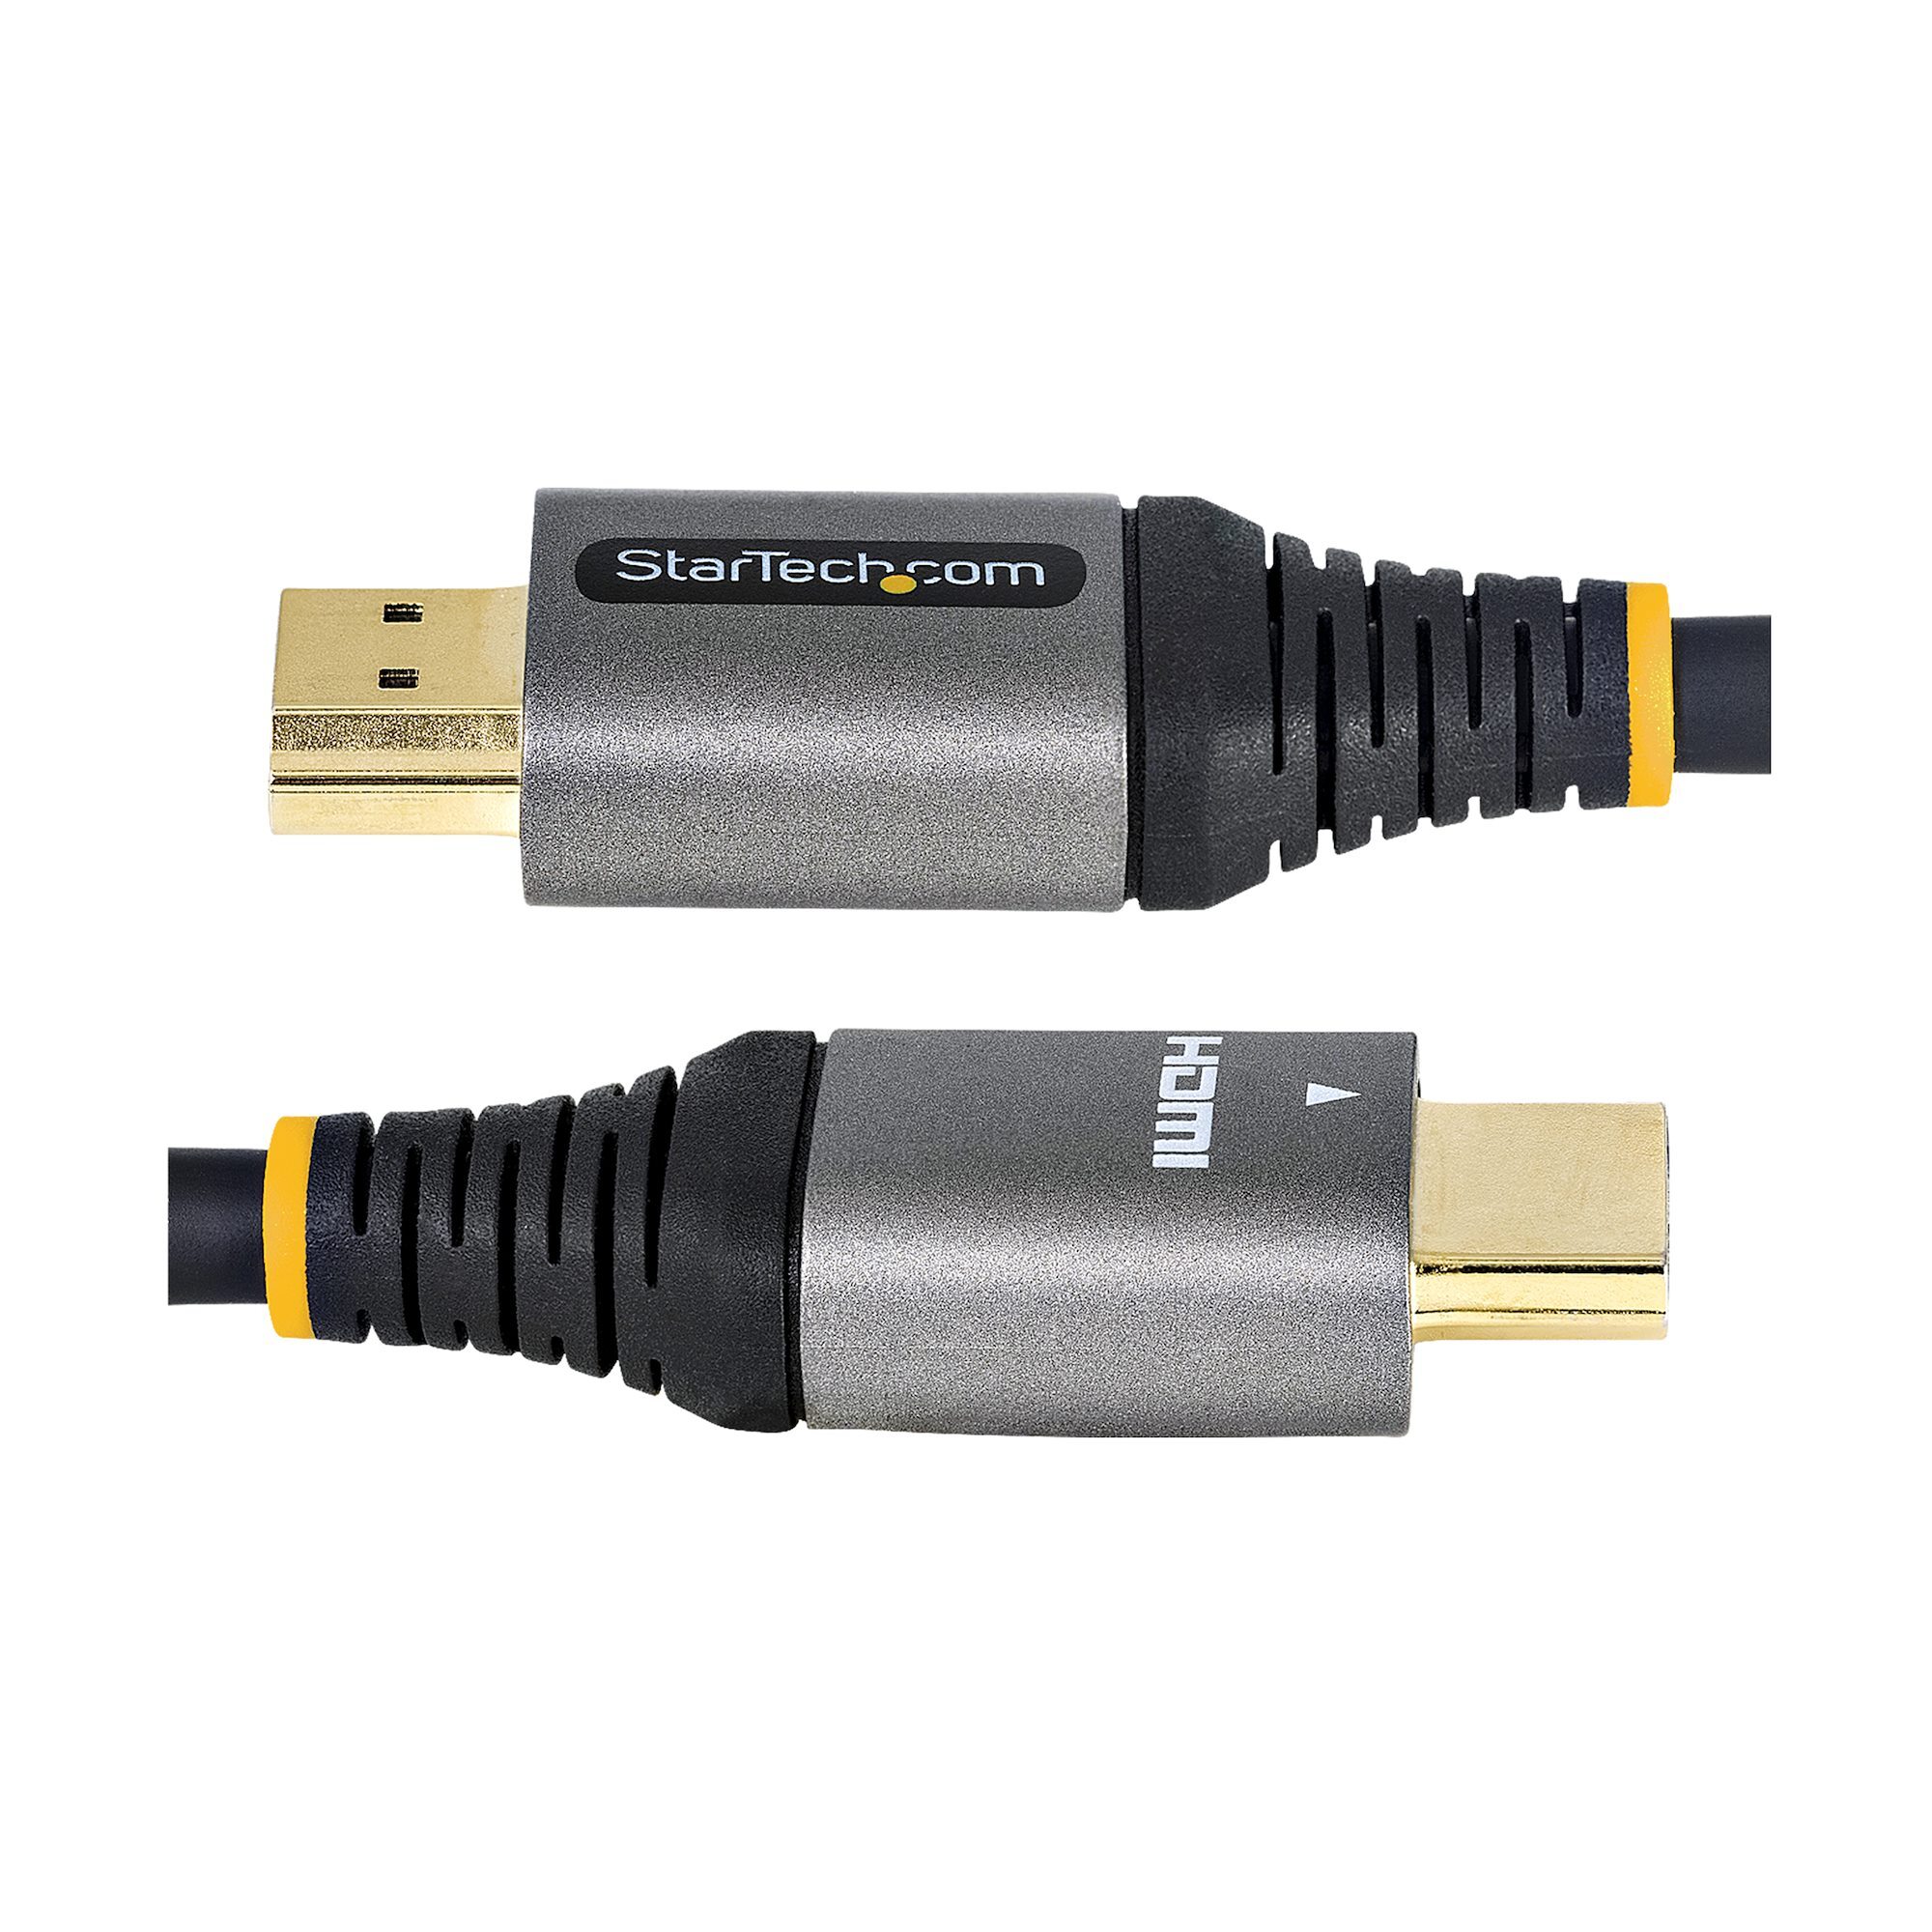 StarTech.com 1m(3ft) HDMI Cable with Locking Screw - 4K 60Hz HDR - High  Speed HDMI 2.0 Monitor Cable with Locking Screw Connector for Secure